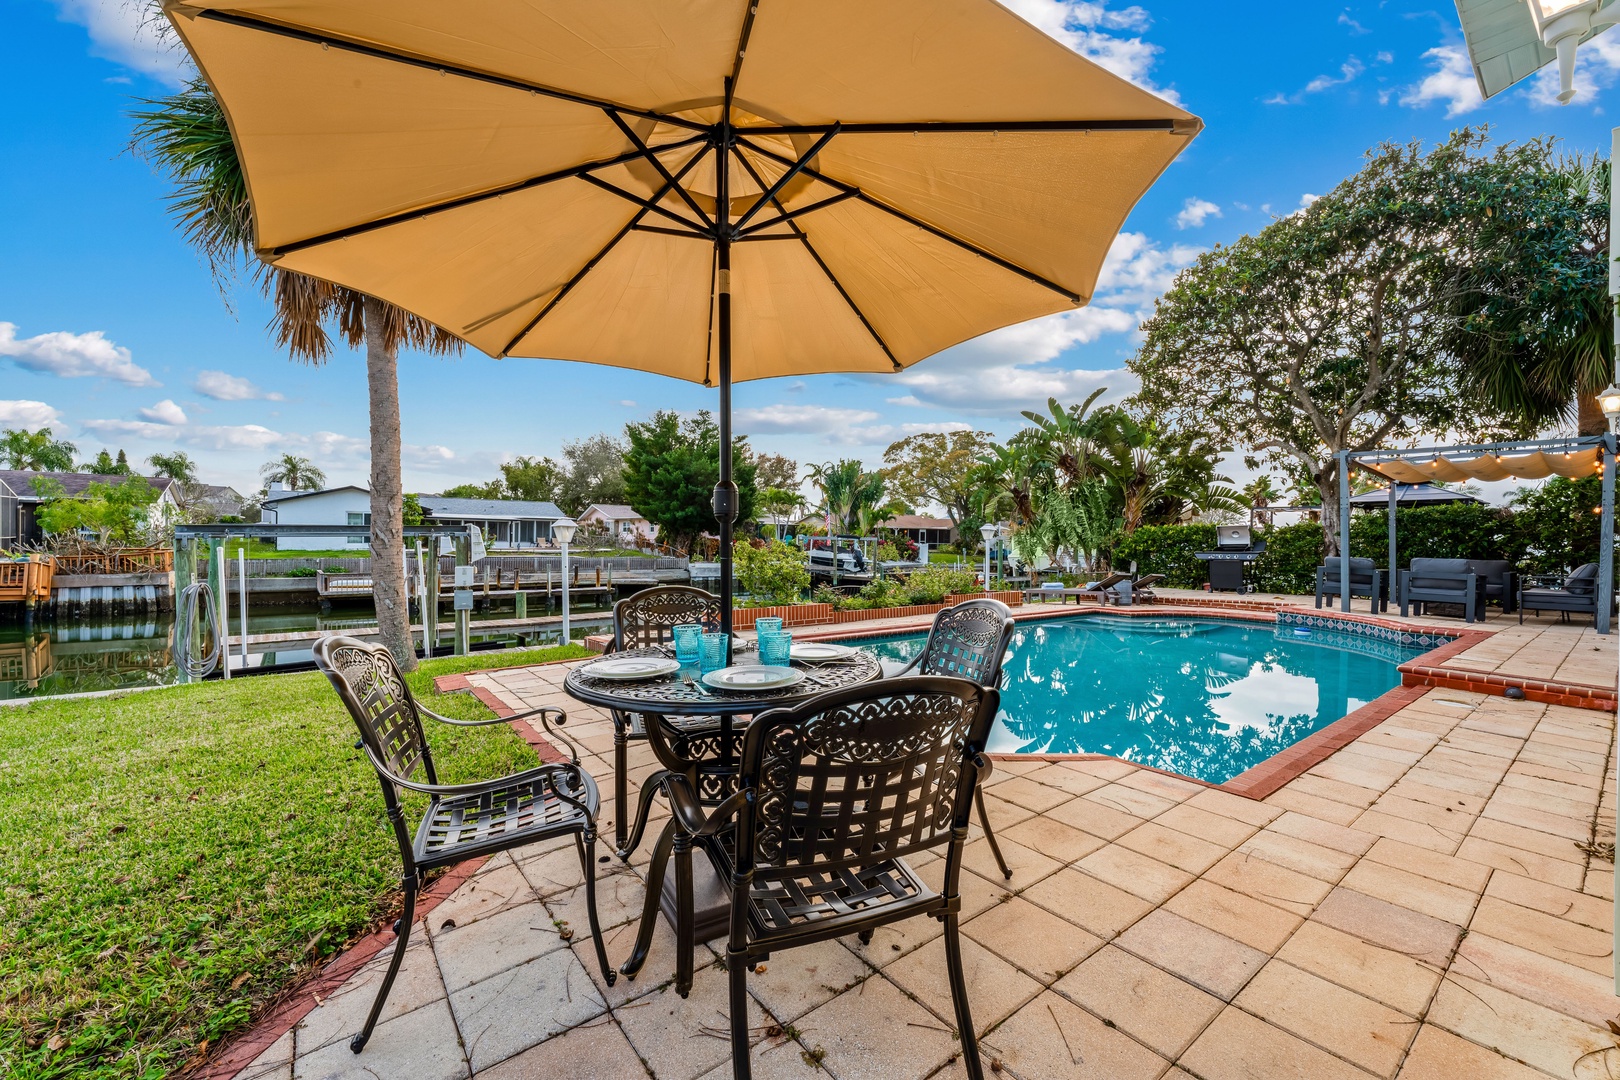 Savor waterside dining on the back patio, just steps from the pool